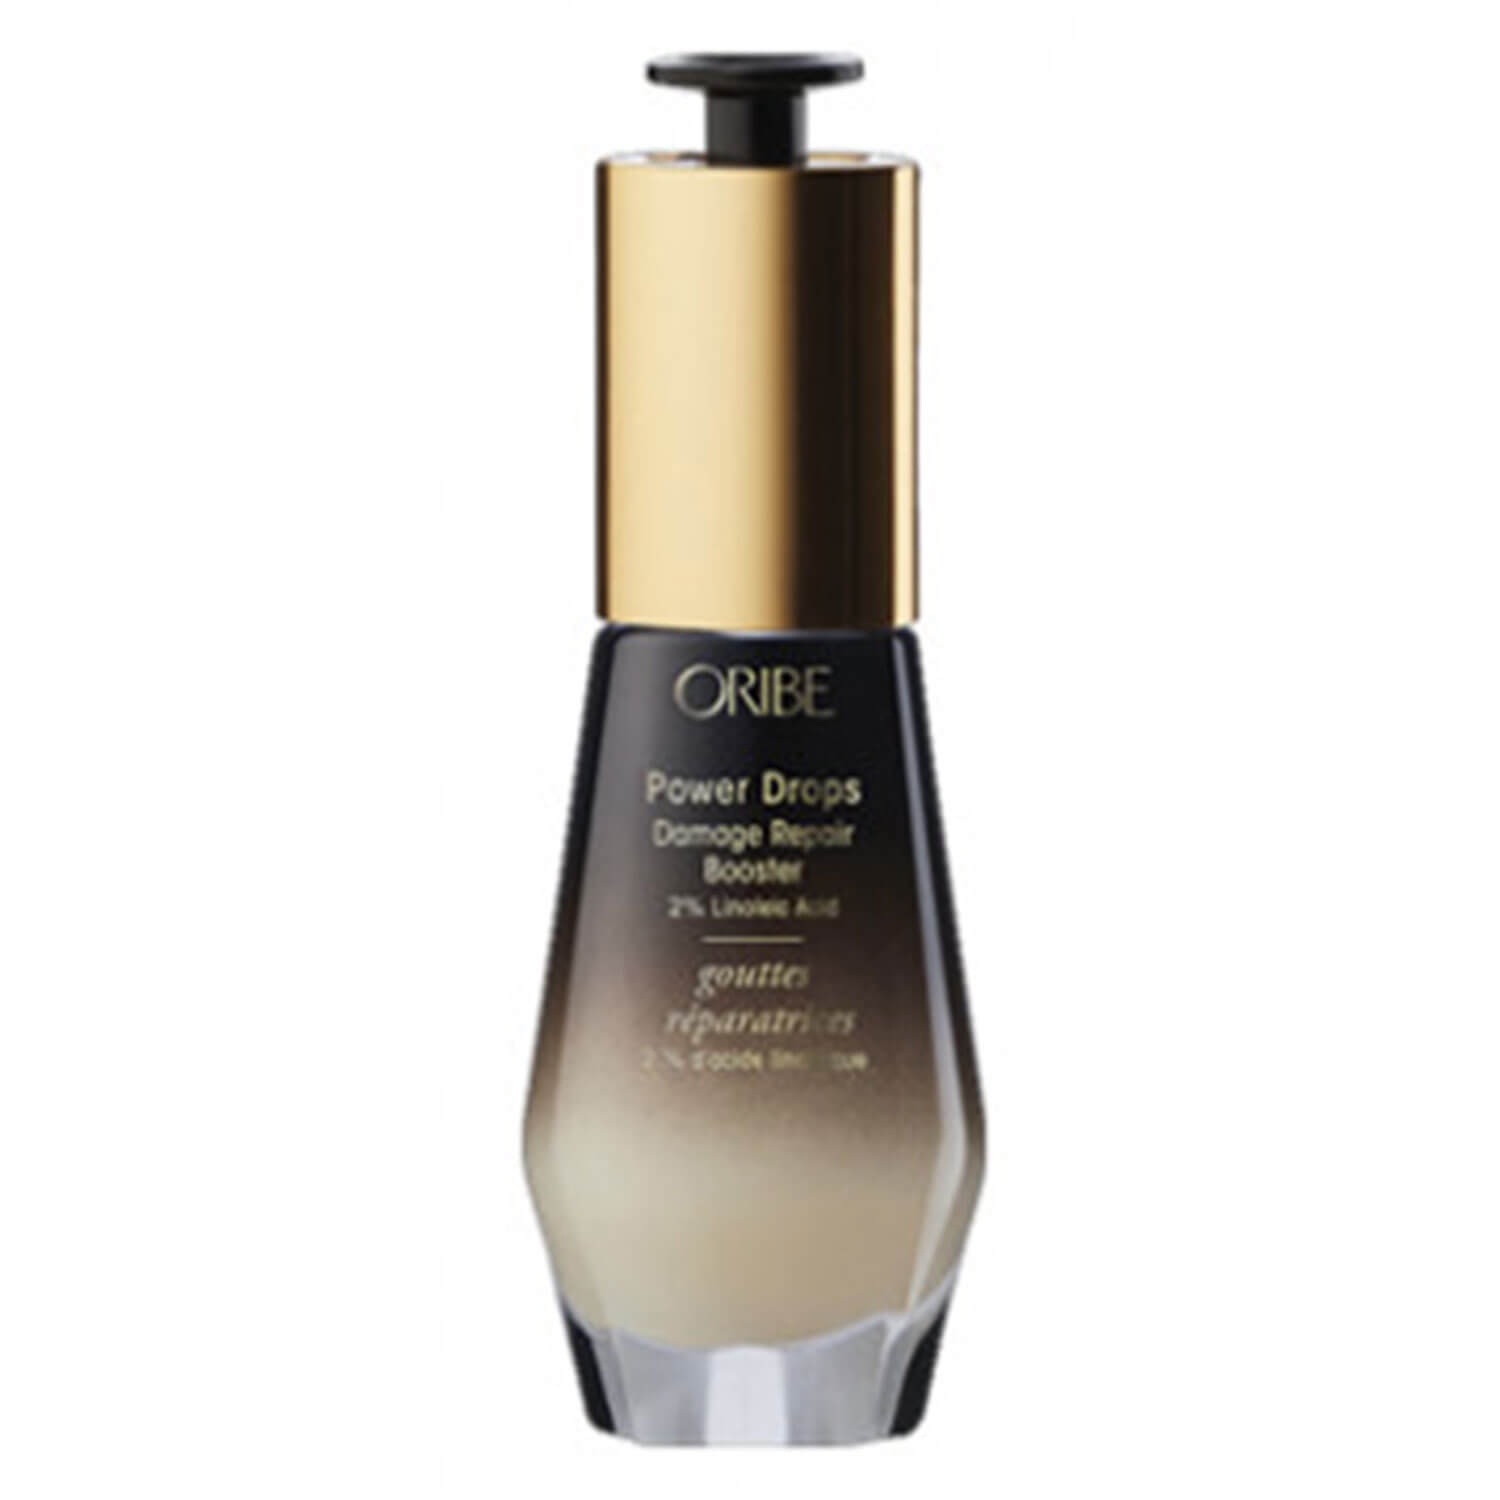 Product image from Oribe Care - Power Drops Damage Repair Booster